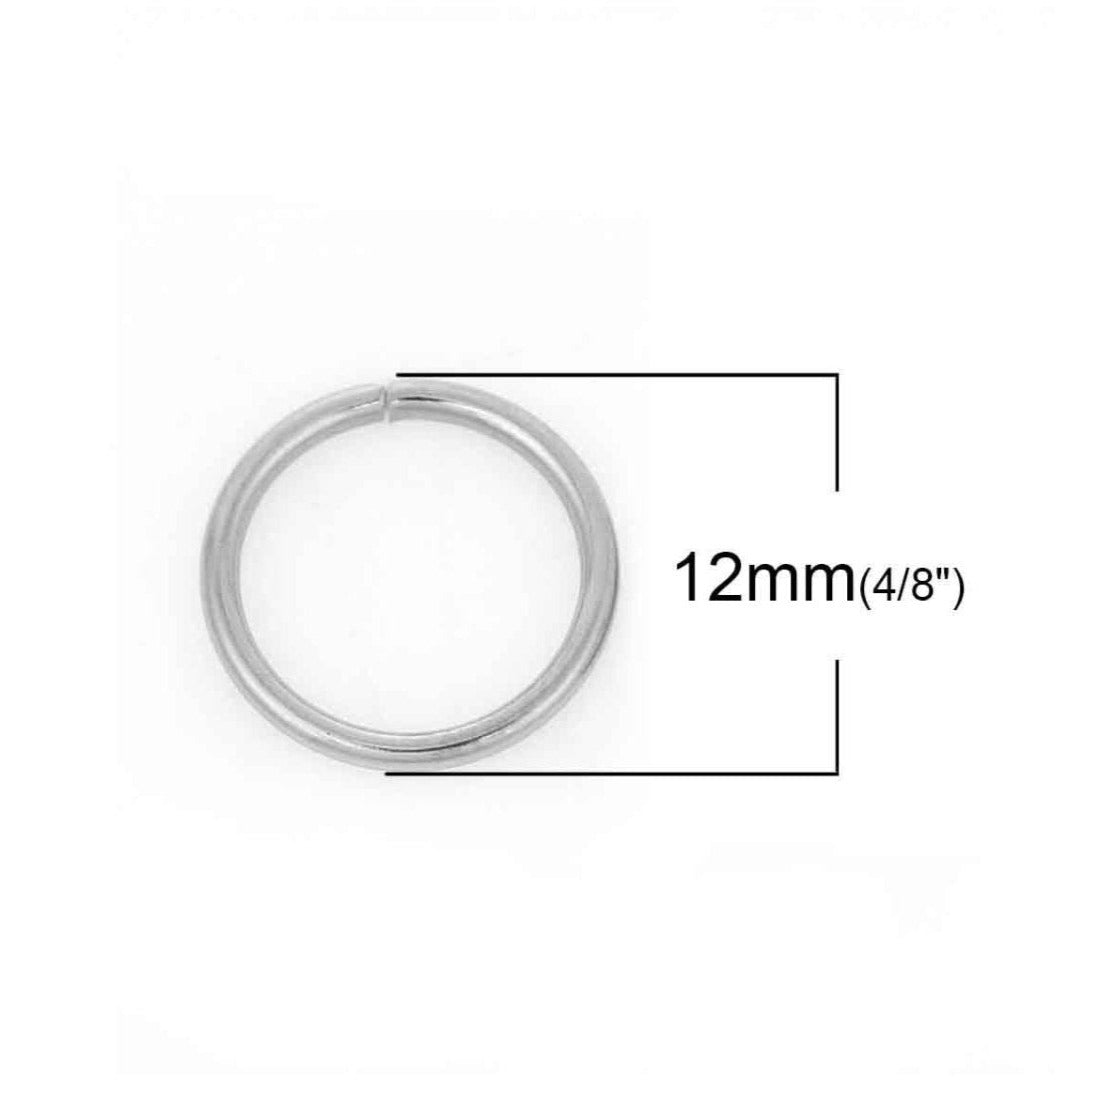 50 Stainless steel jump rings 3mm to 16mm, all gauges